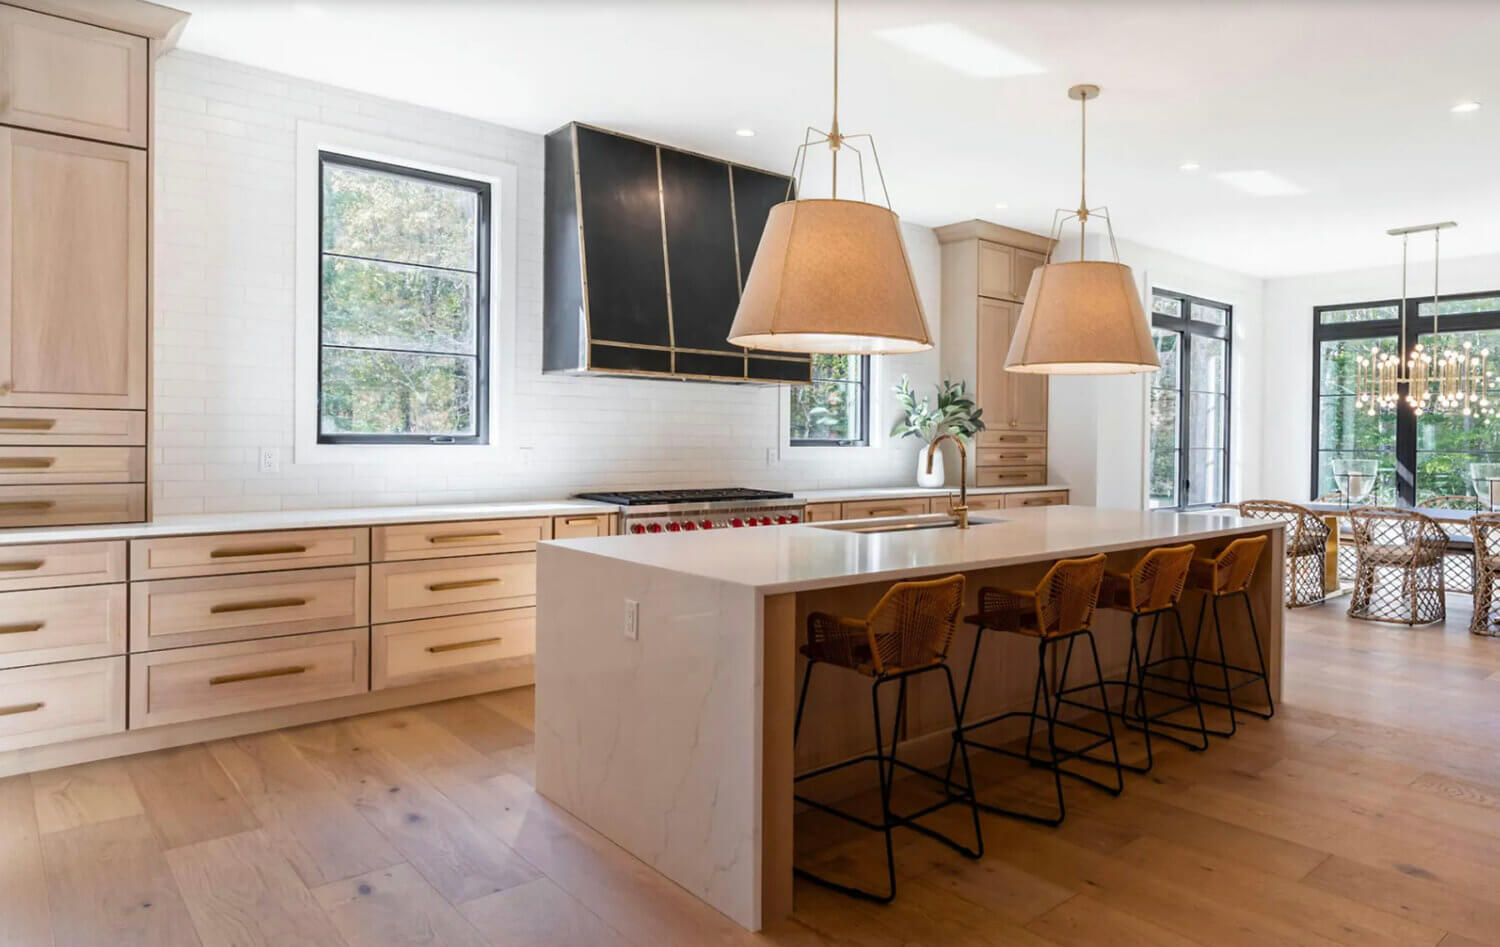 A modern farmhouse kitchen with light stained white oak cabinets, brass accents, black window frames and metal hood. The kitchen island has waterfall countertops and large scale fabric pendant lights.